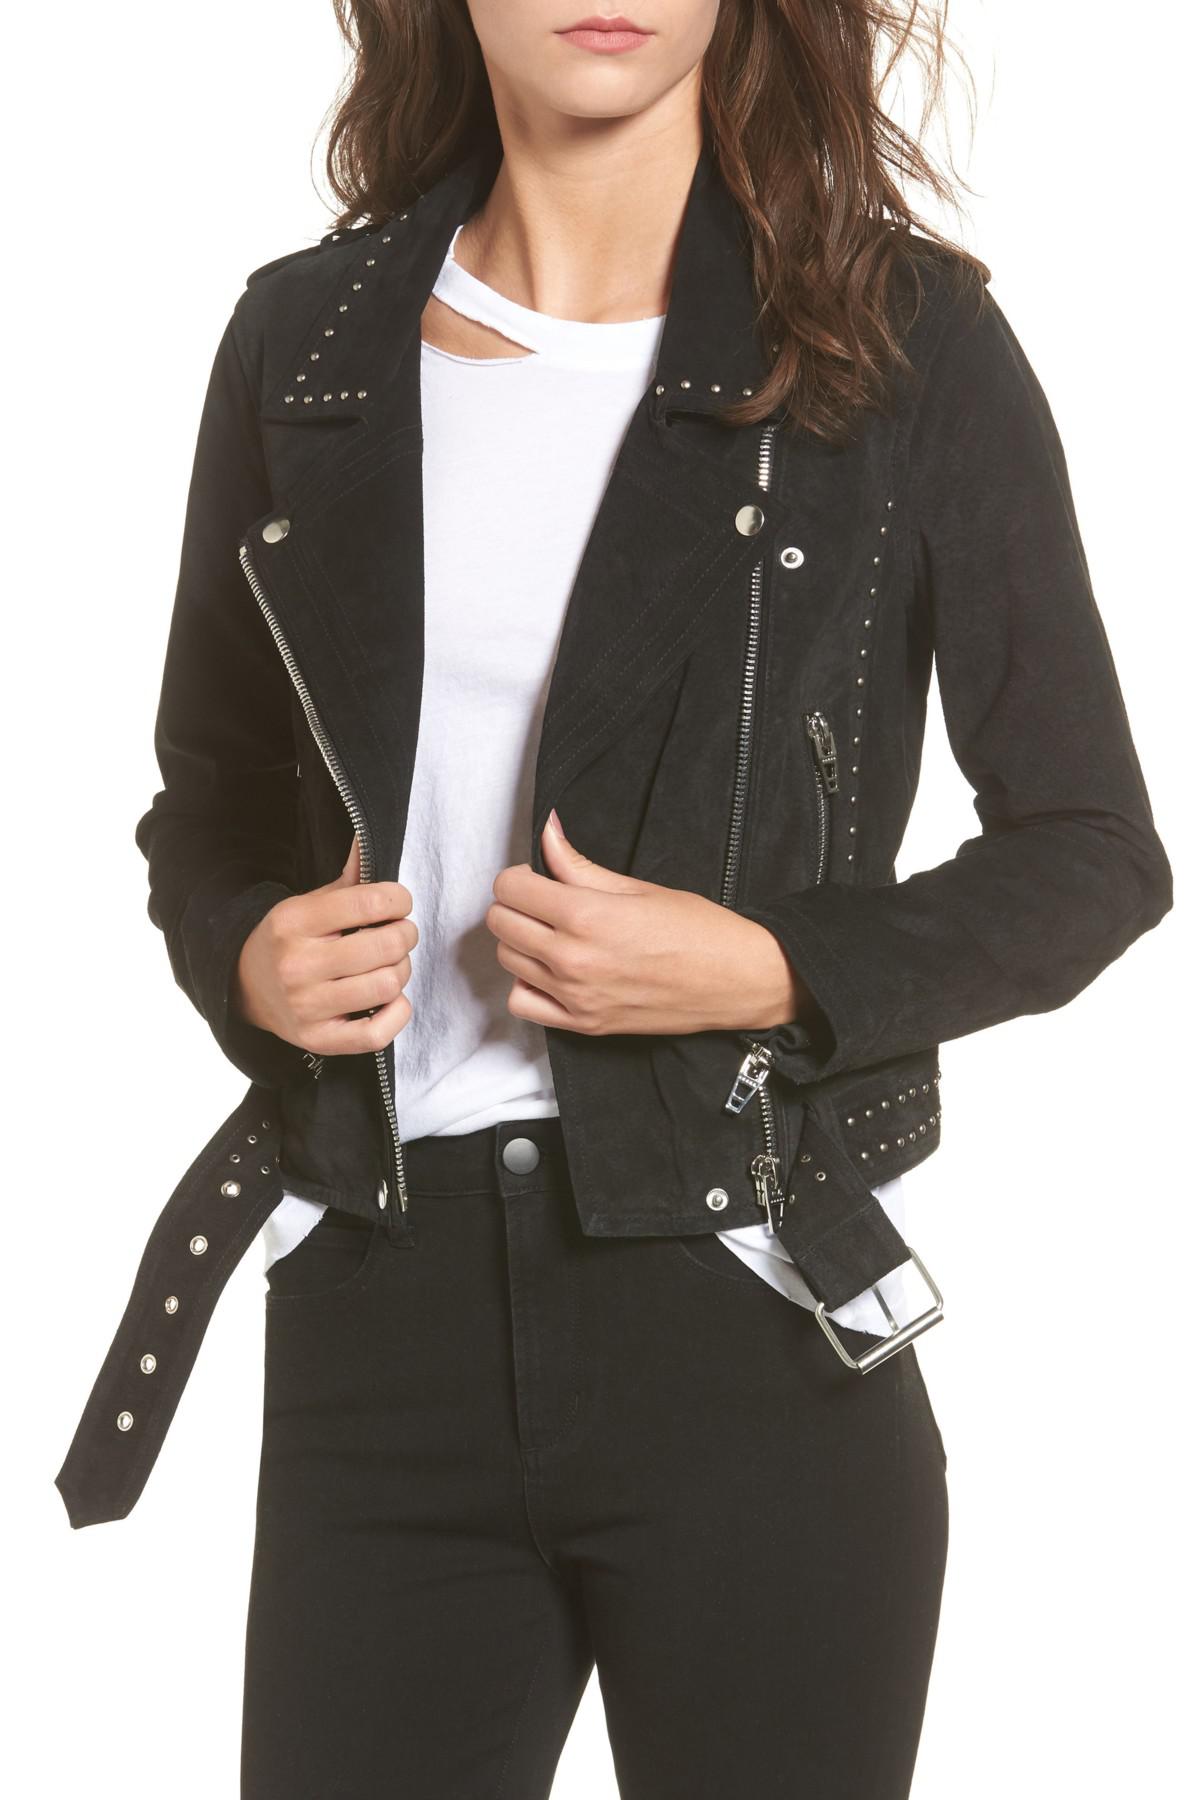 Lyst - Blank Nyc Studded Suede Moto Jacket in Black